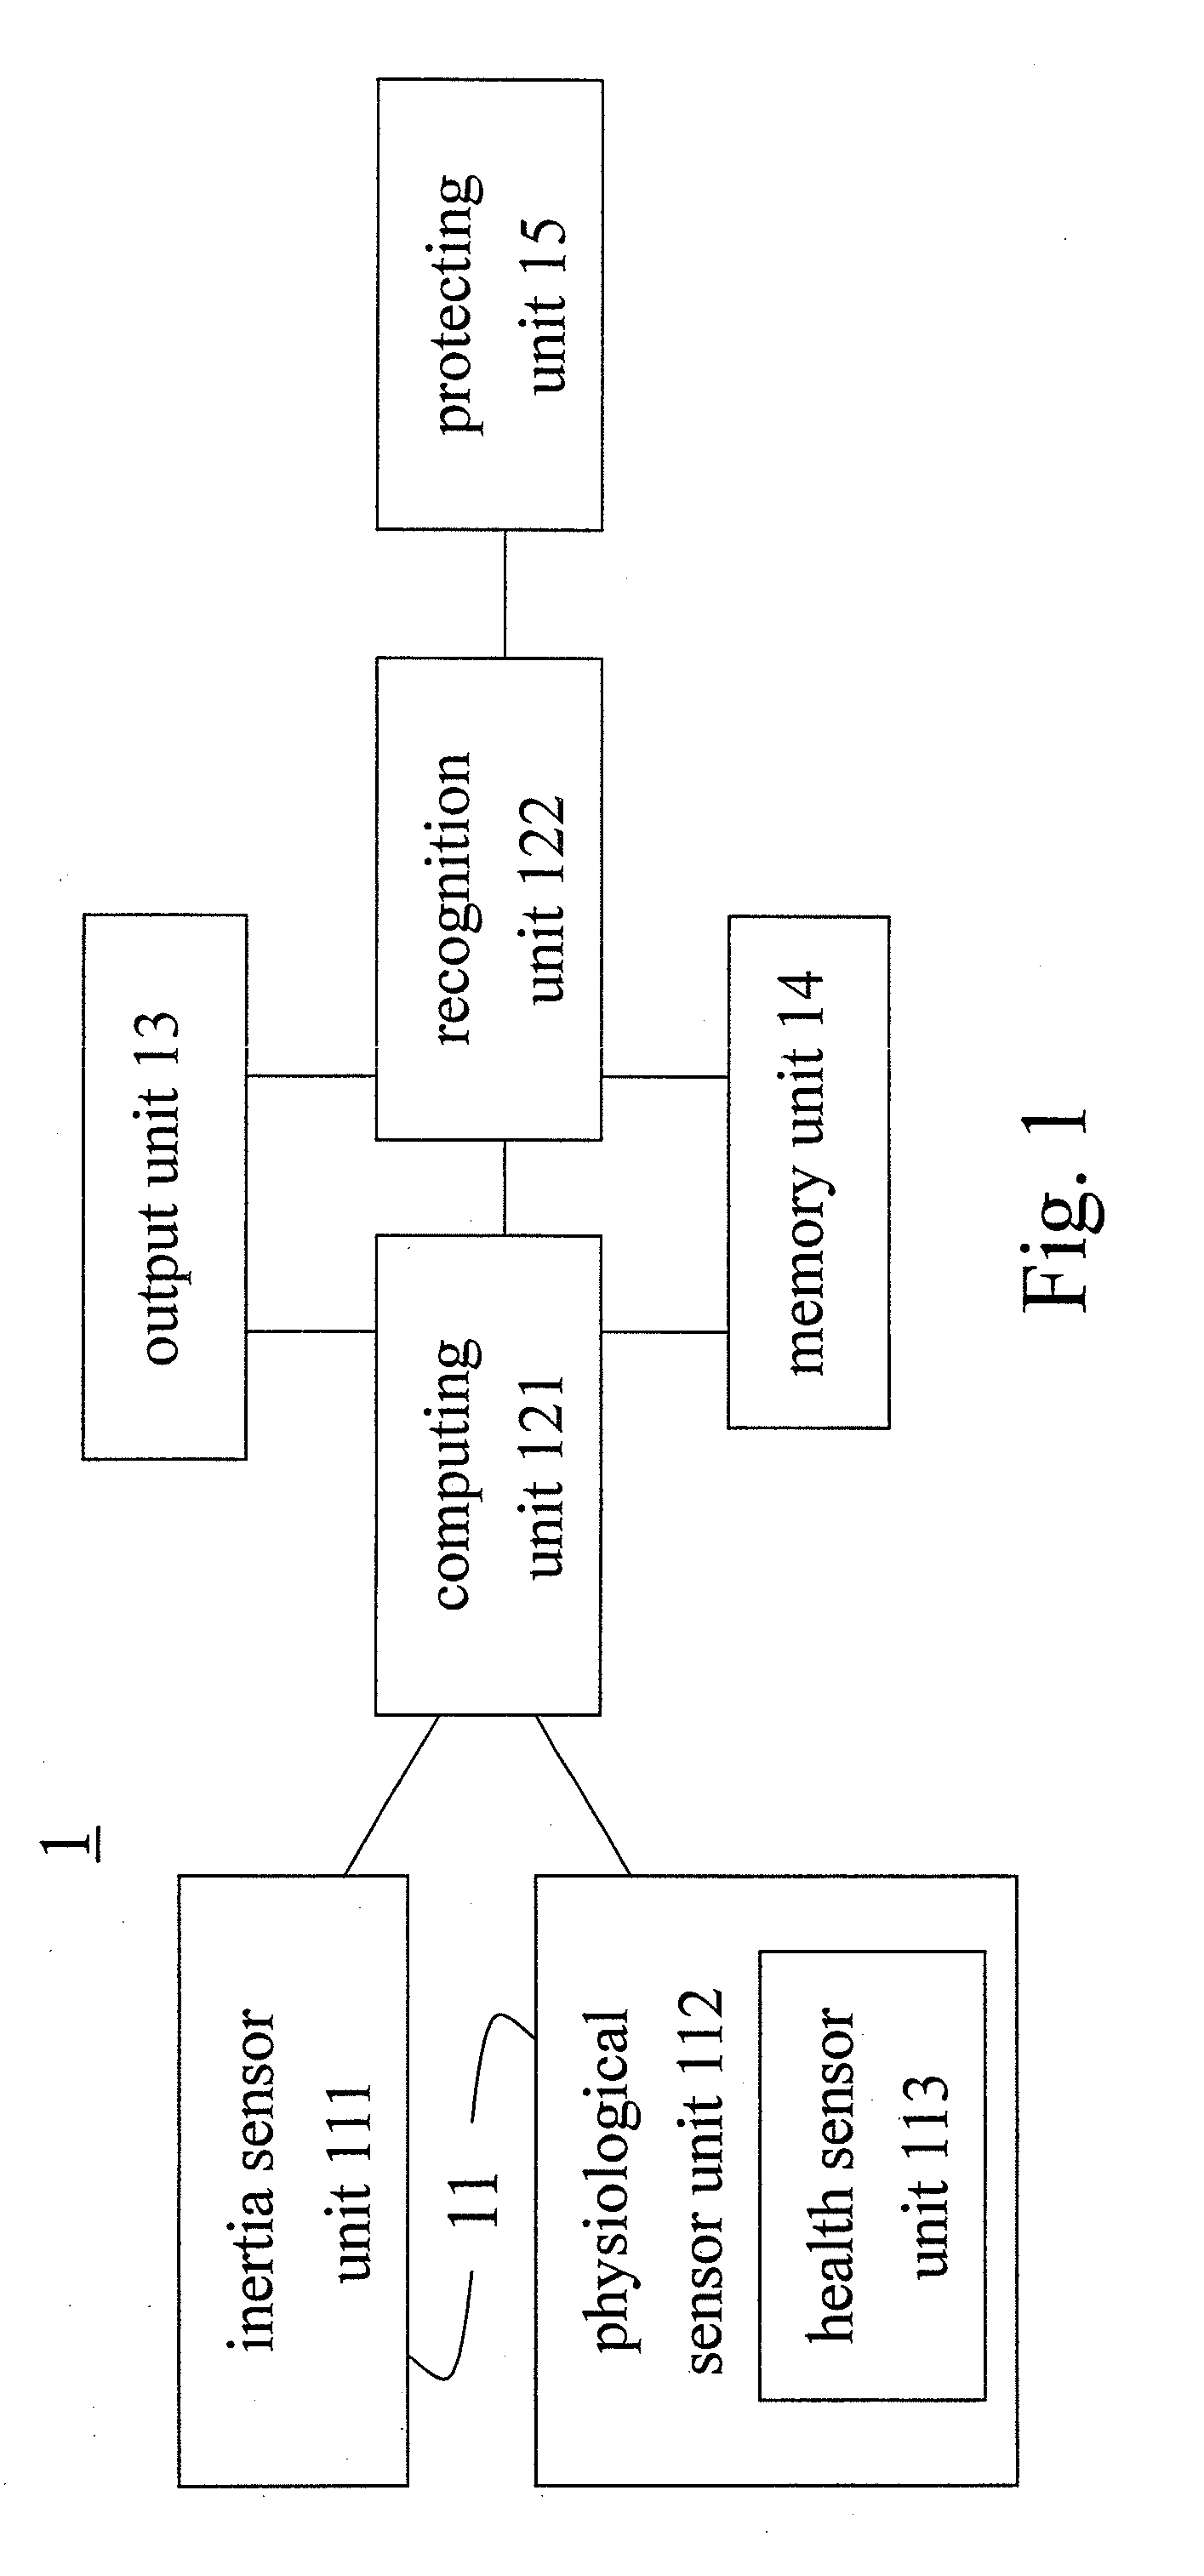 Apparatus for identifying falls and activities of daily living